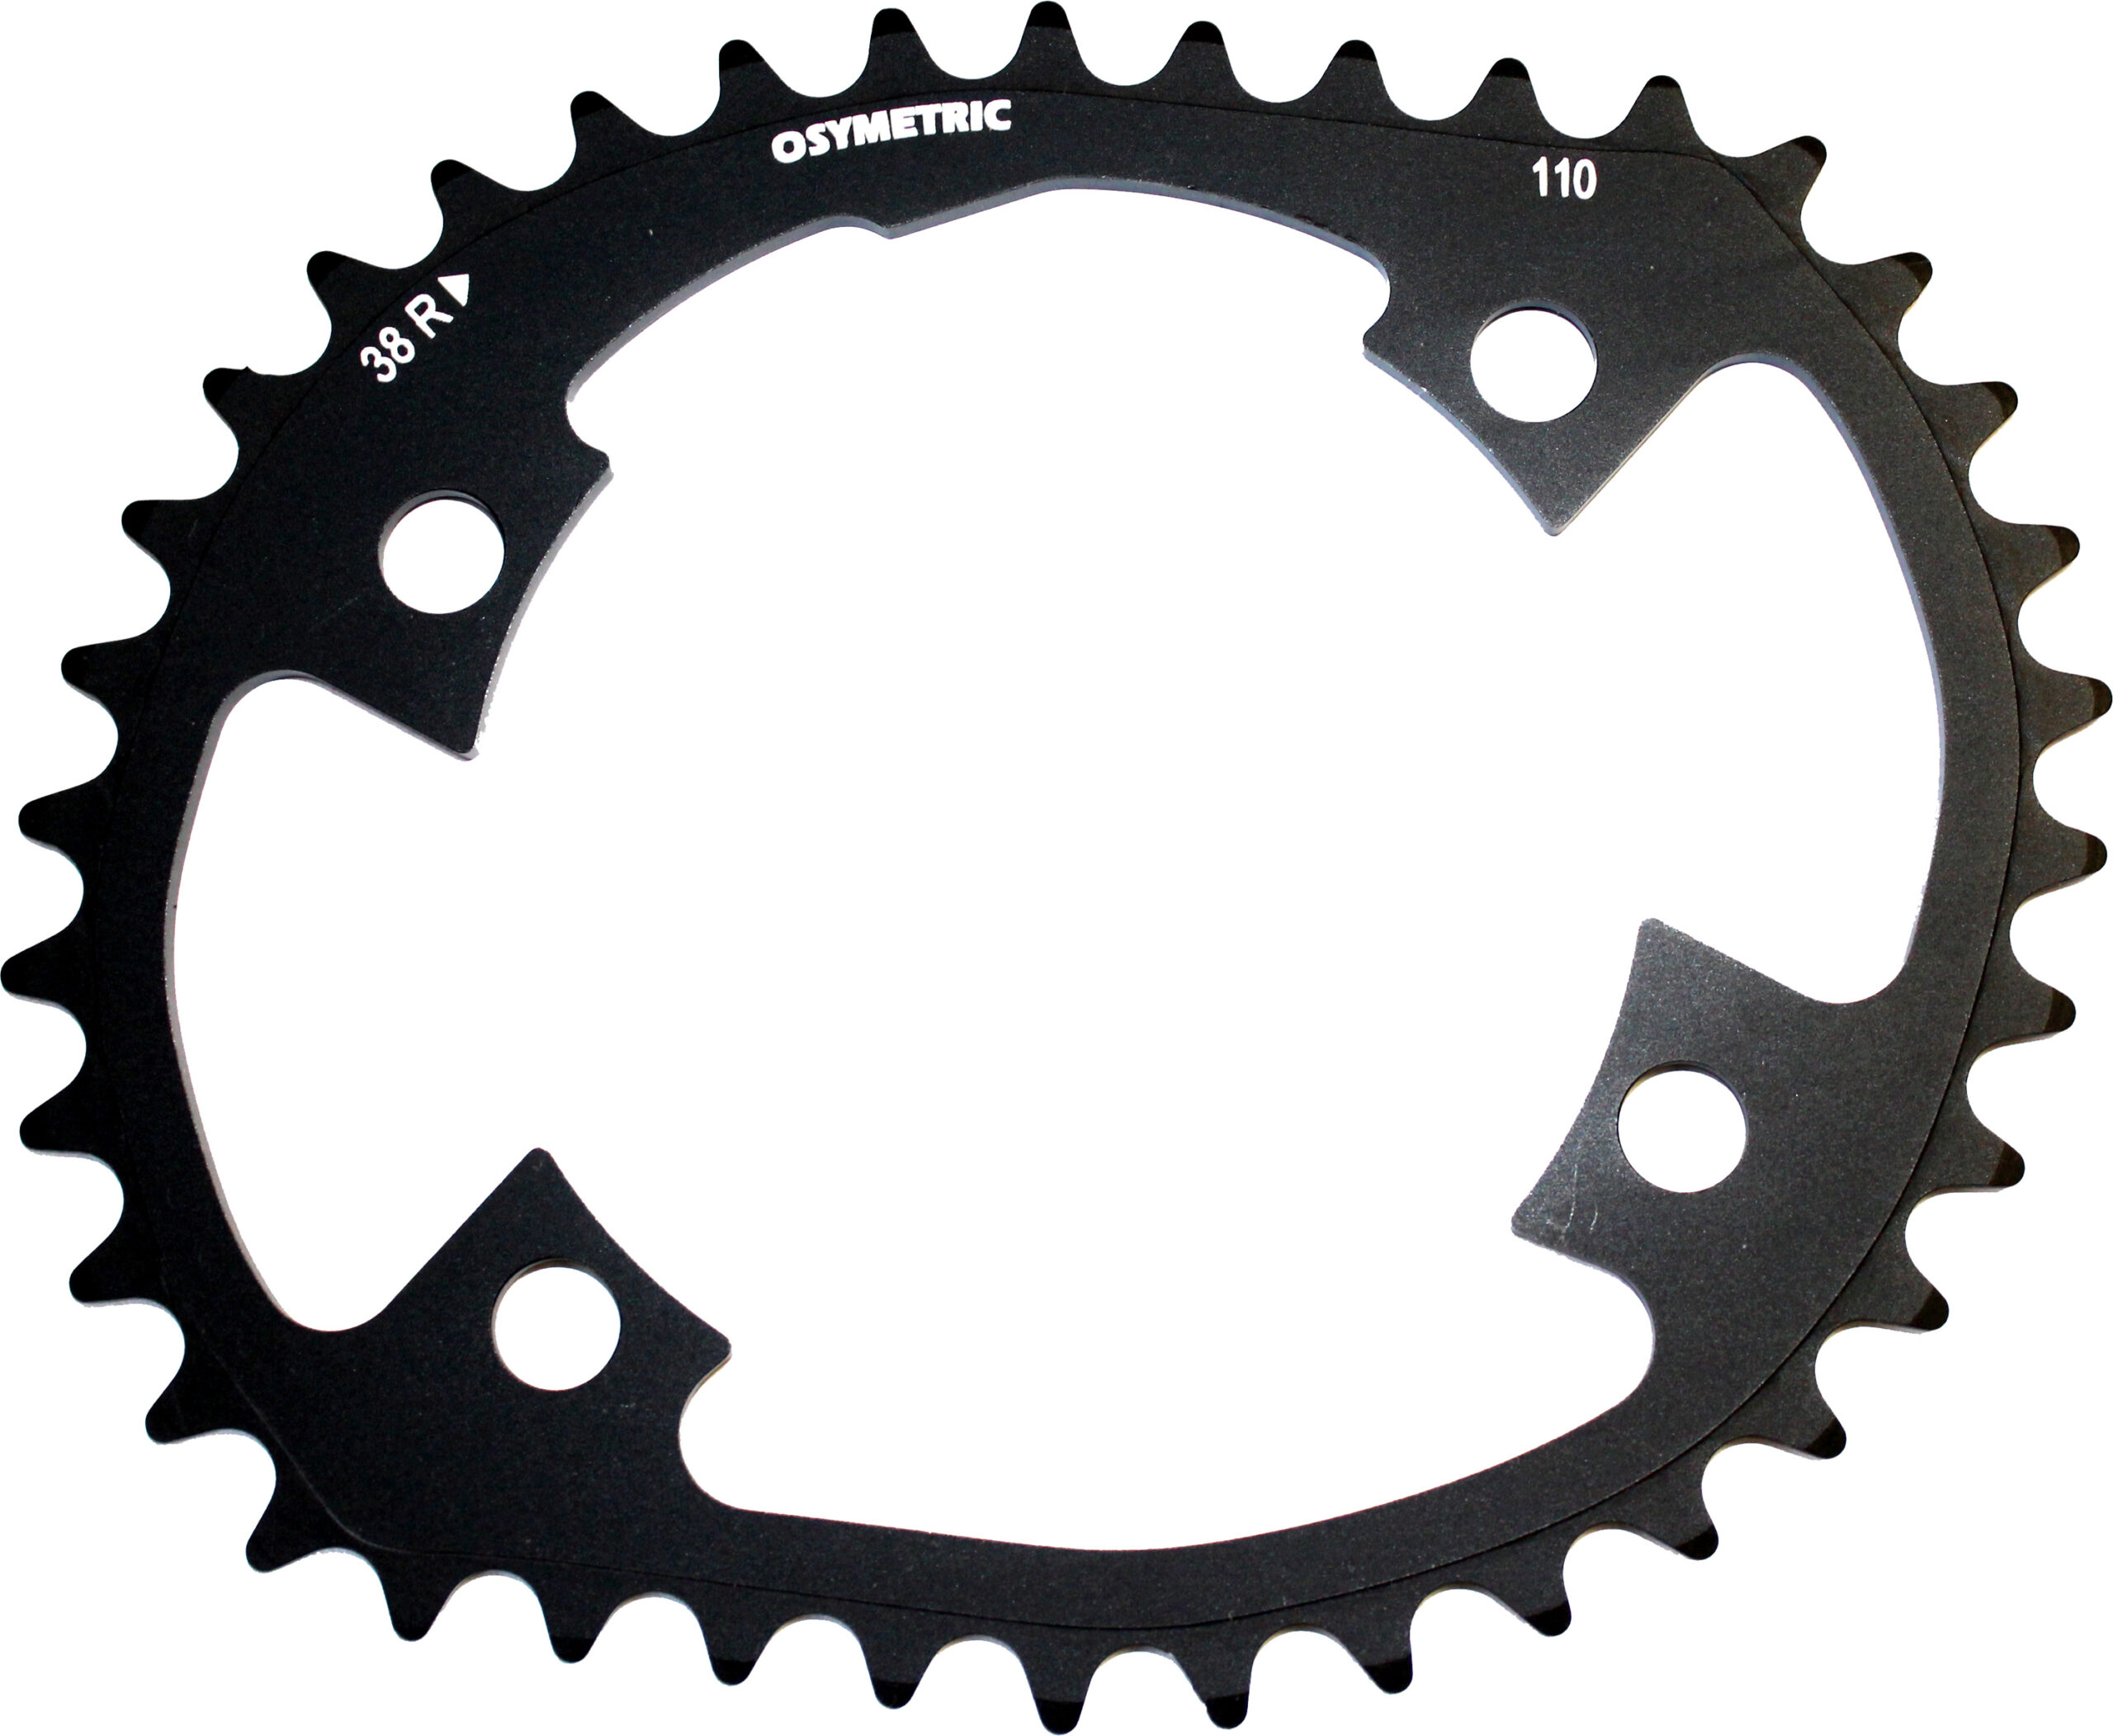 52T Osymetric 4-Arm/145mm Campag Chainring